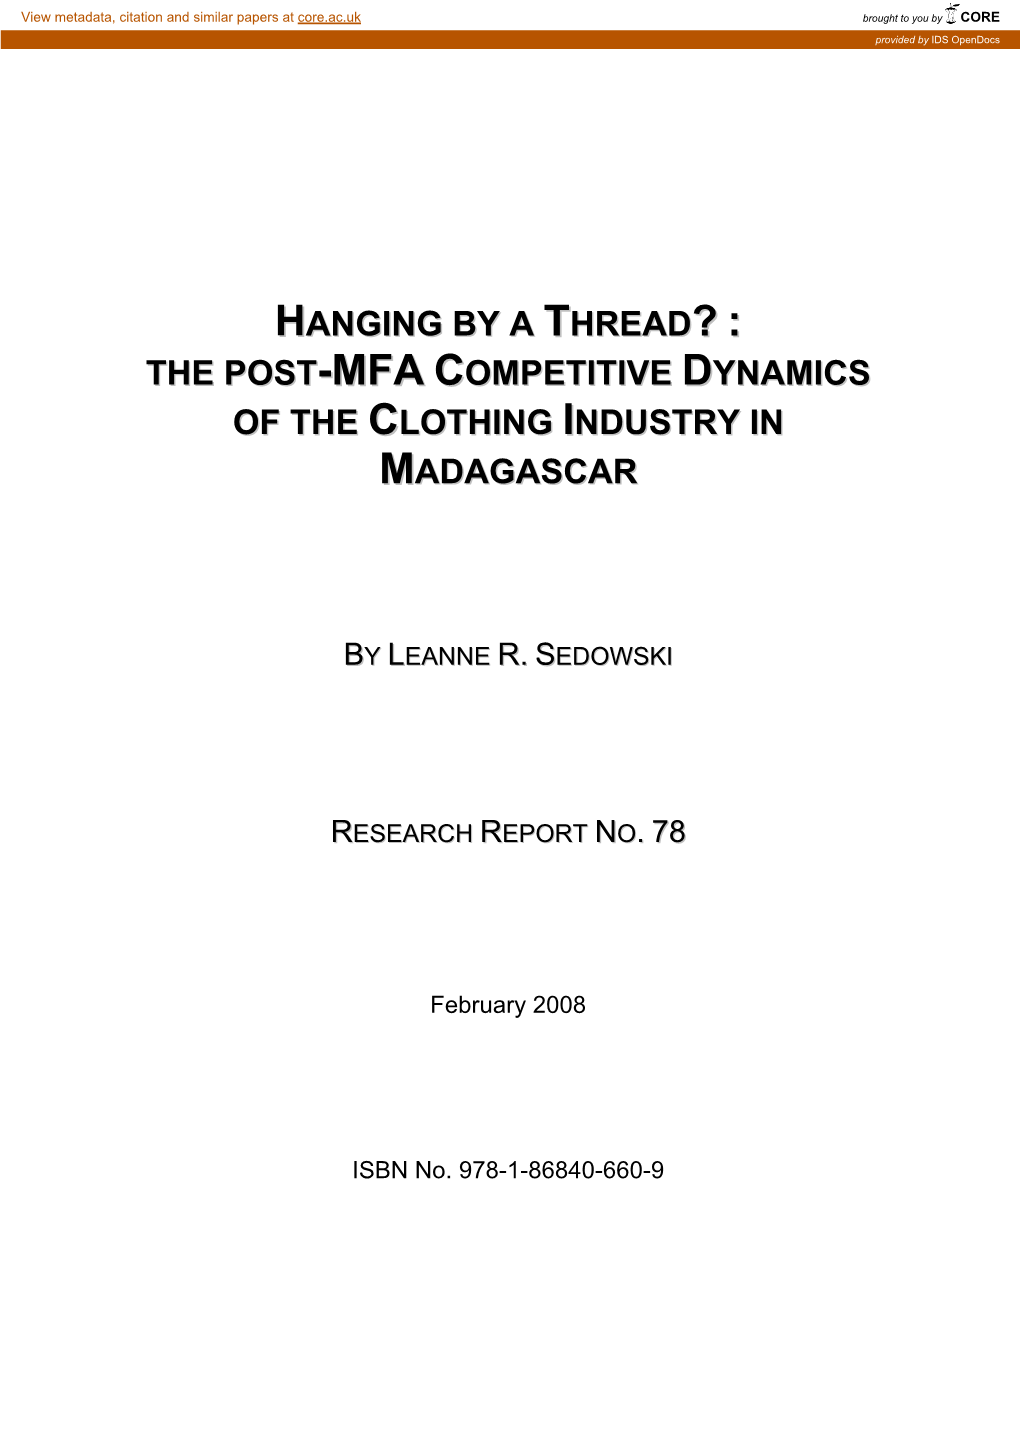 Hanging by a Thread? : the Post-Mfa Competitive Dynamics of the Clothing Industry in Madagascar